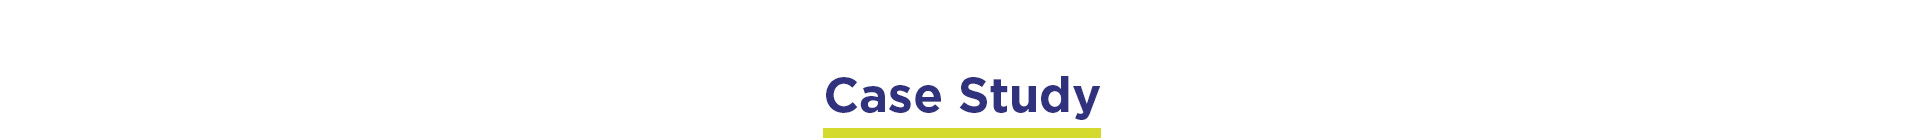 Case studies from Streamline Systems